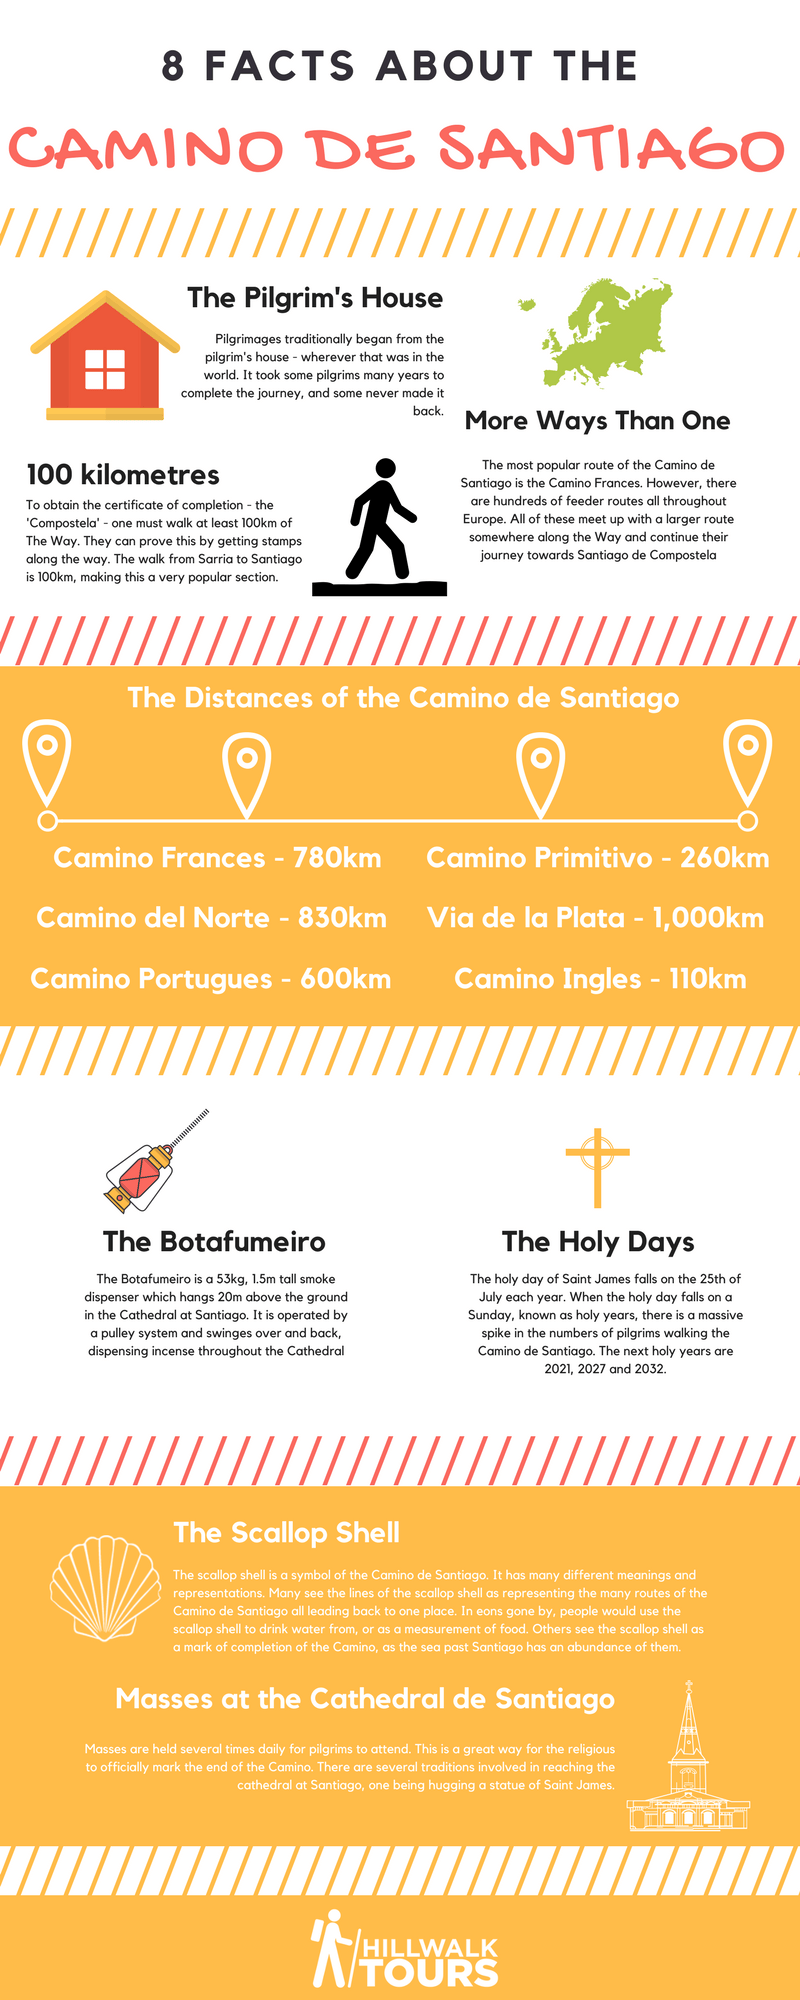 Facts about the Camino de Santiago - Infographic